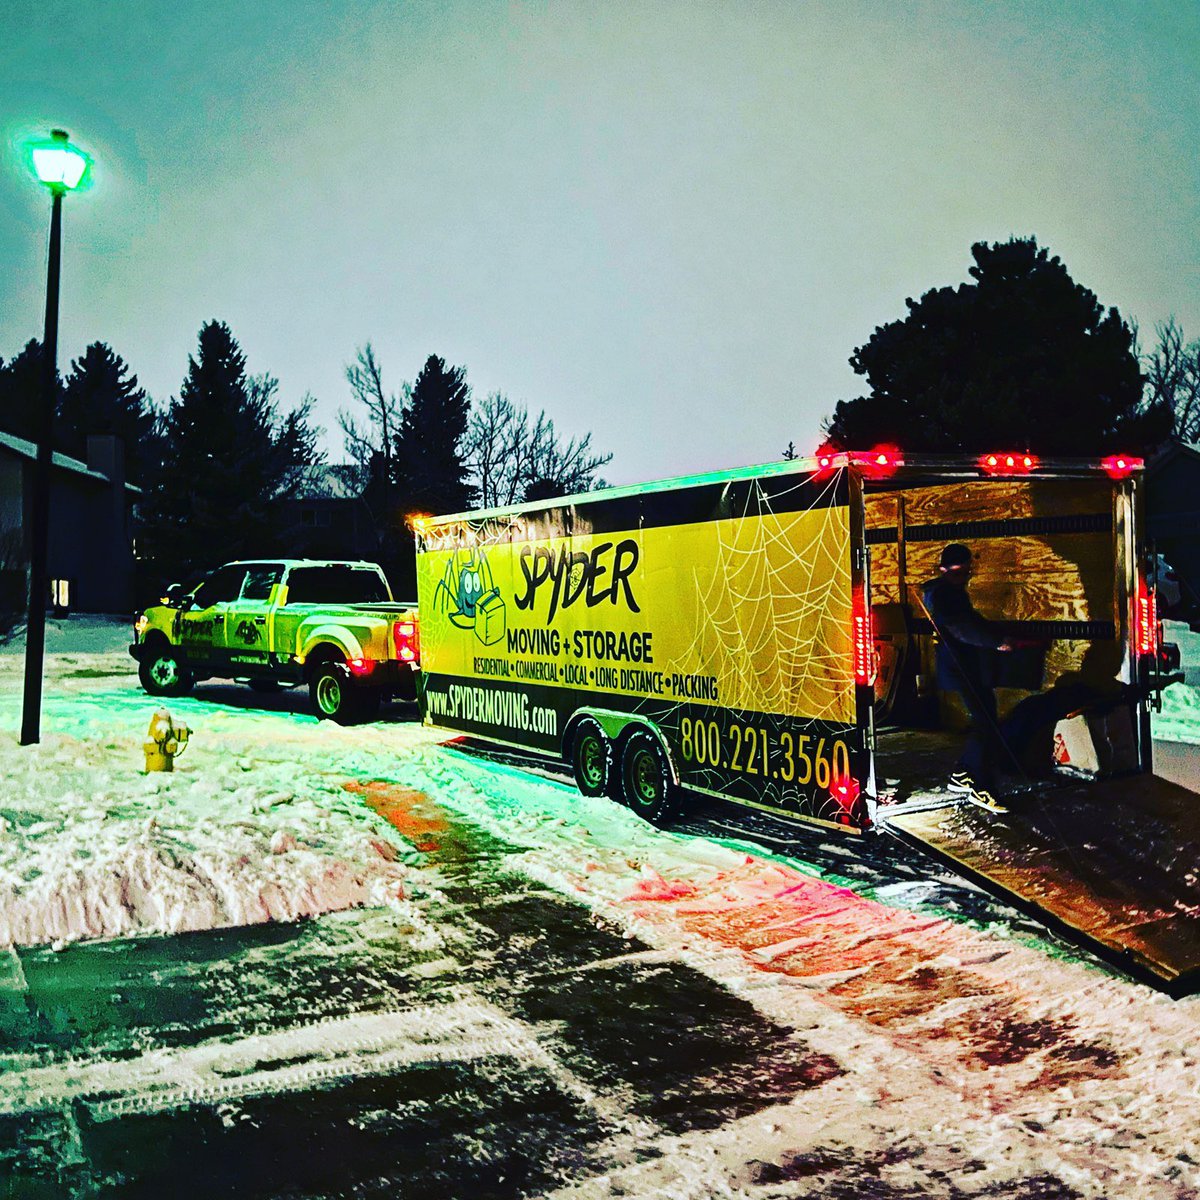 Move delivery in Centennial, Colorado. Call for your next move at (800) 221-3560 or get a free quote online at SpyderMoving.com
#spydermoving #services #movingcompany #moving #furnituredelivery #movingservices #move #delivery #centennial #centennialcolorado #centennialmove